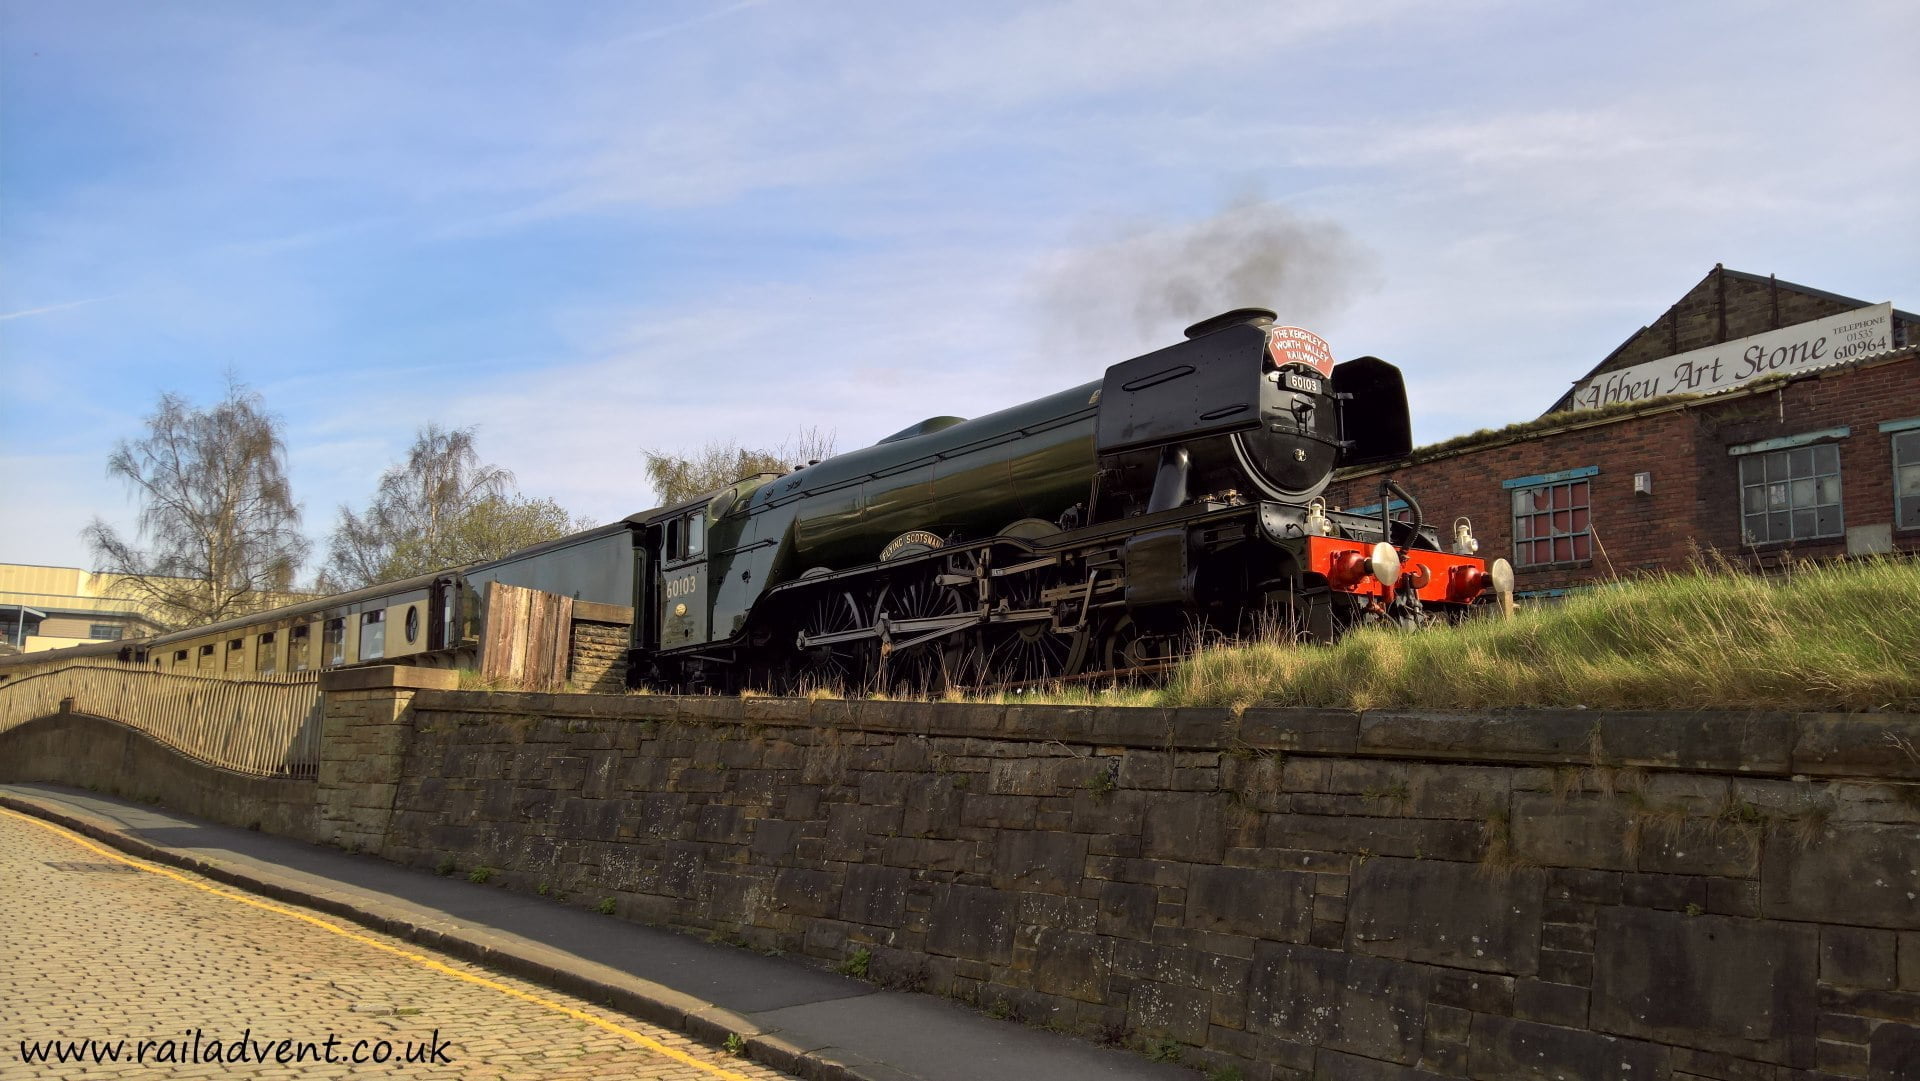 No. 60103 Flying Scotsman at Keighley on the Keighley & Worth Valley Railway